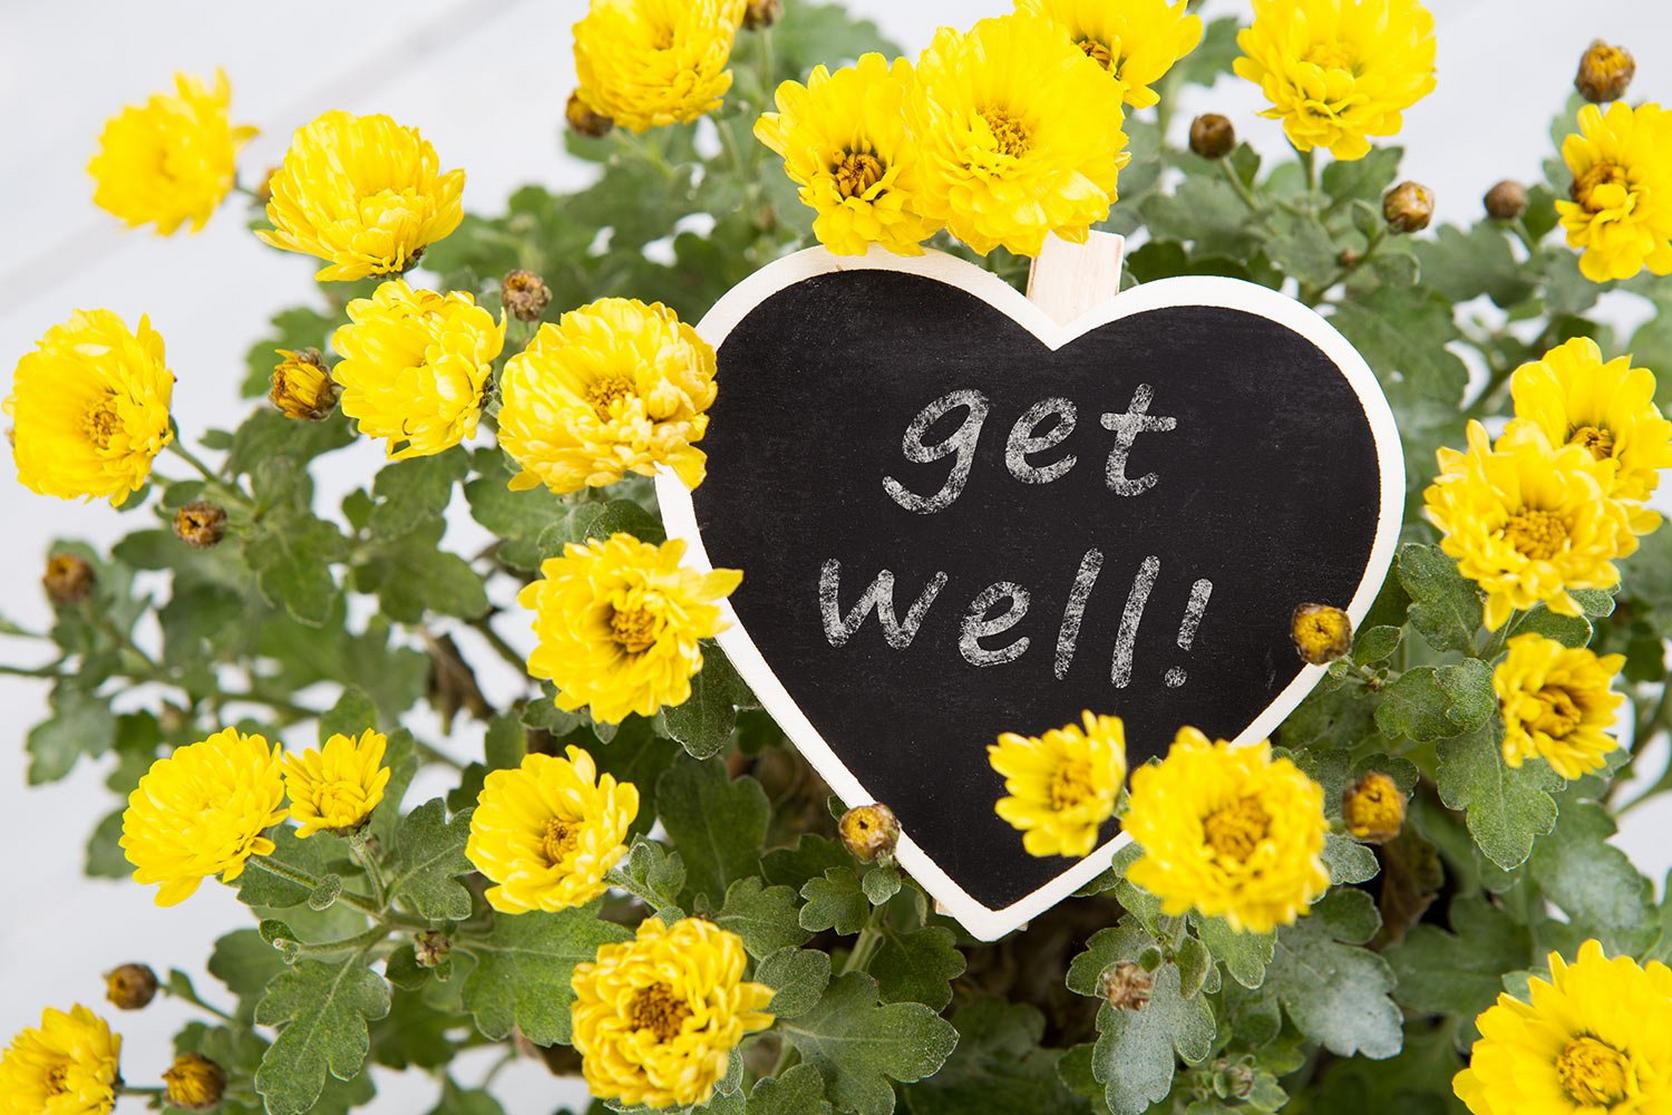 get well soon messages for kids